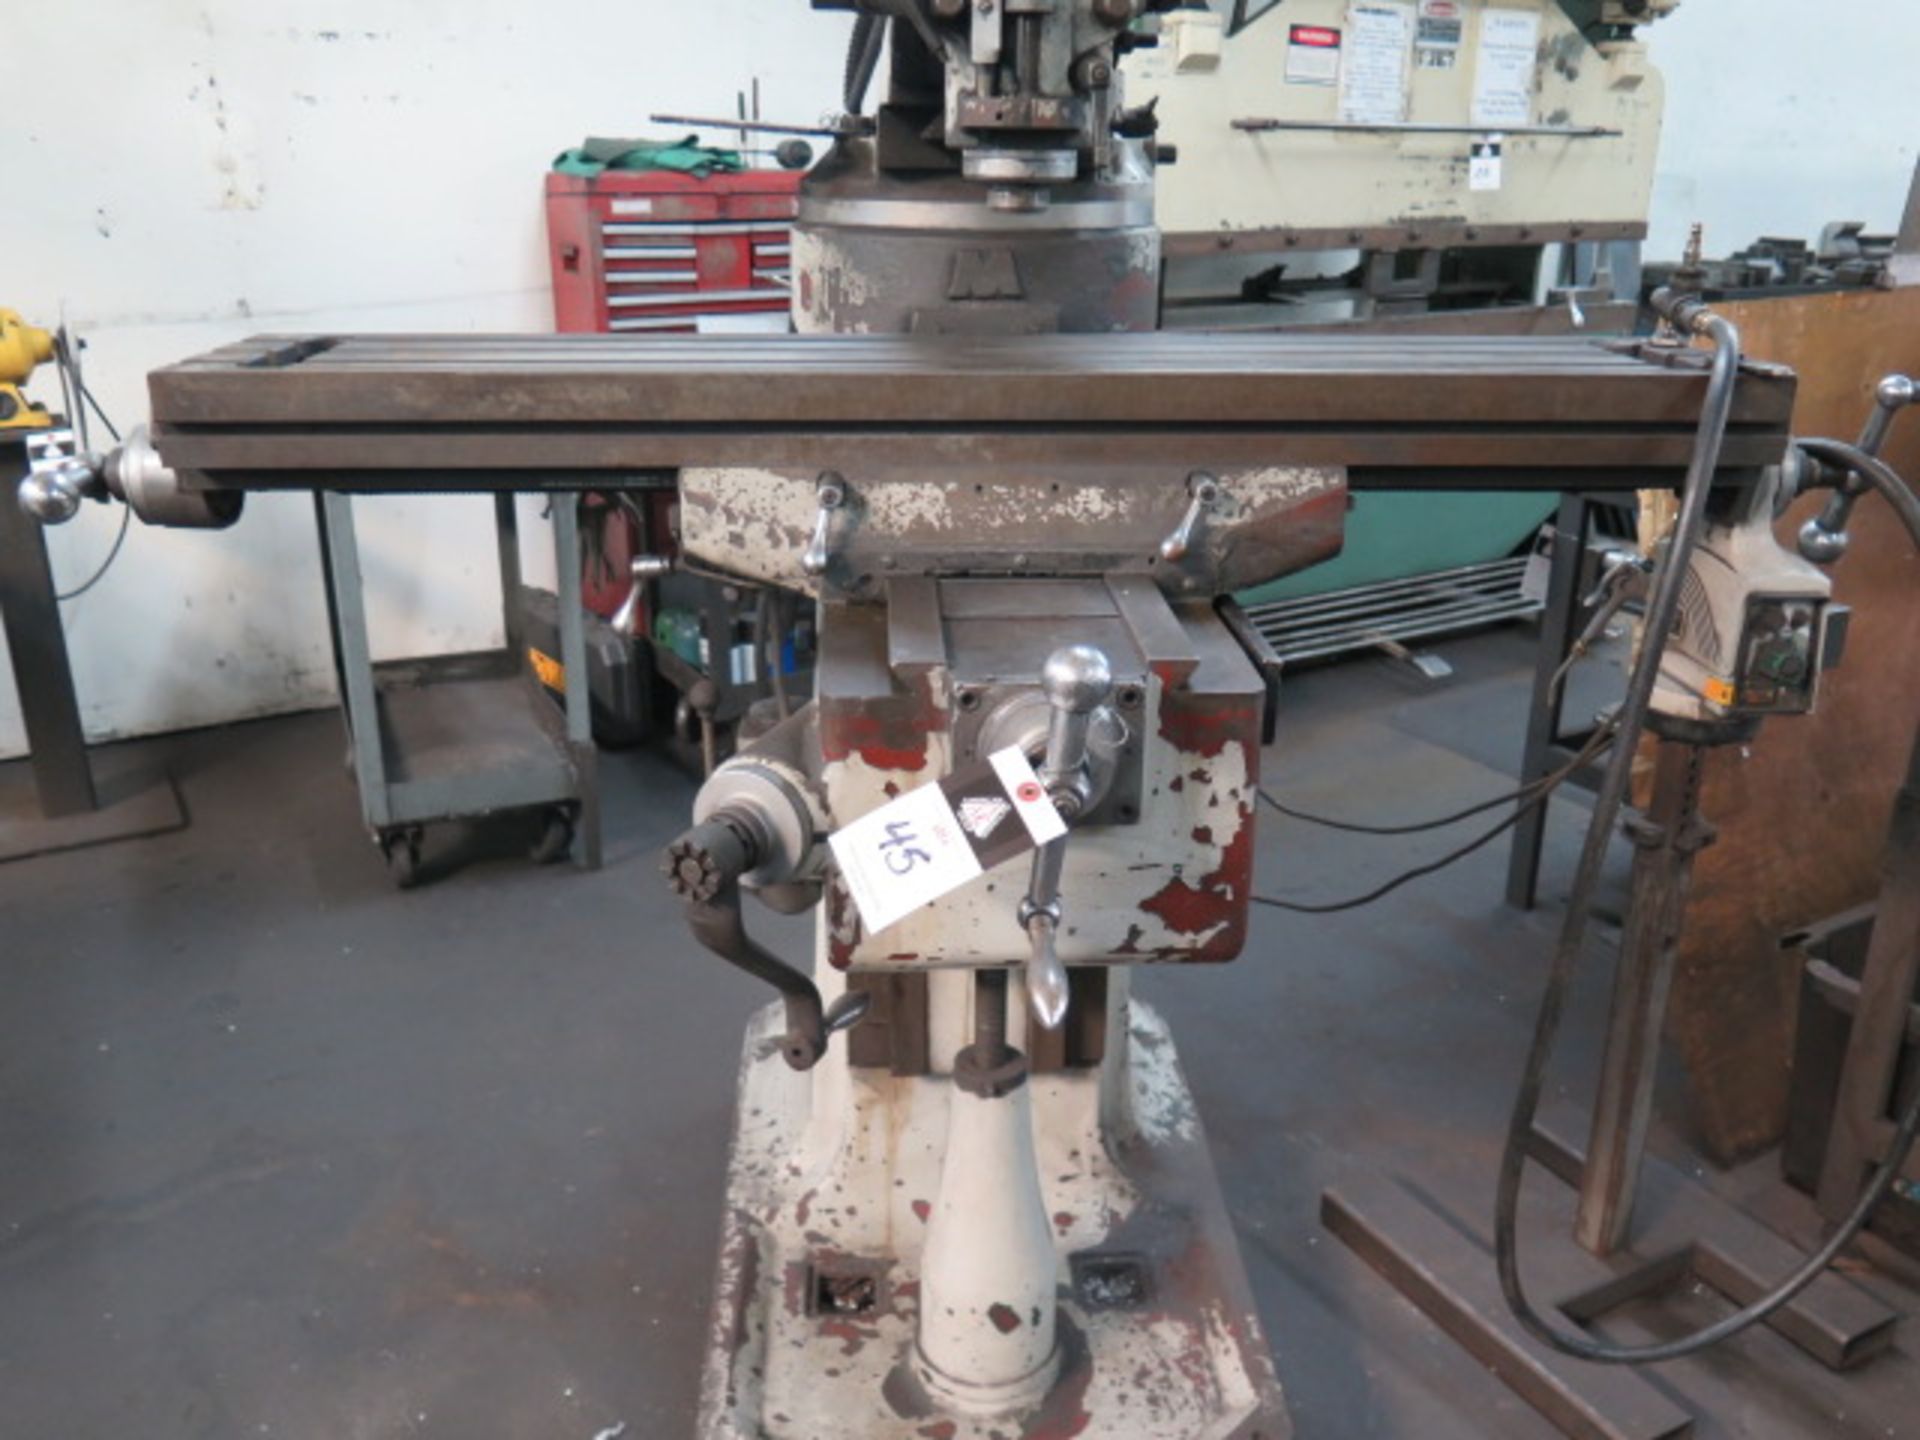 Acra AM-2S Vertical Mill s/n 96-1073-1 w/ 1Hp Motor, 80-5440 RPM, 16-Speeds, Power Feed, SOLD AS IS - Image 7 of 12